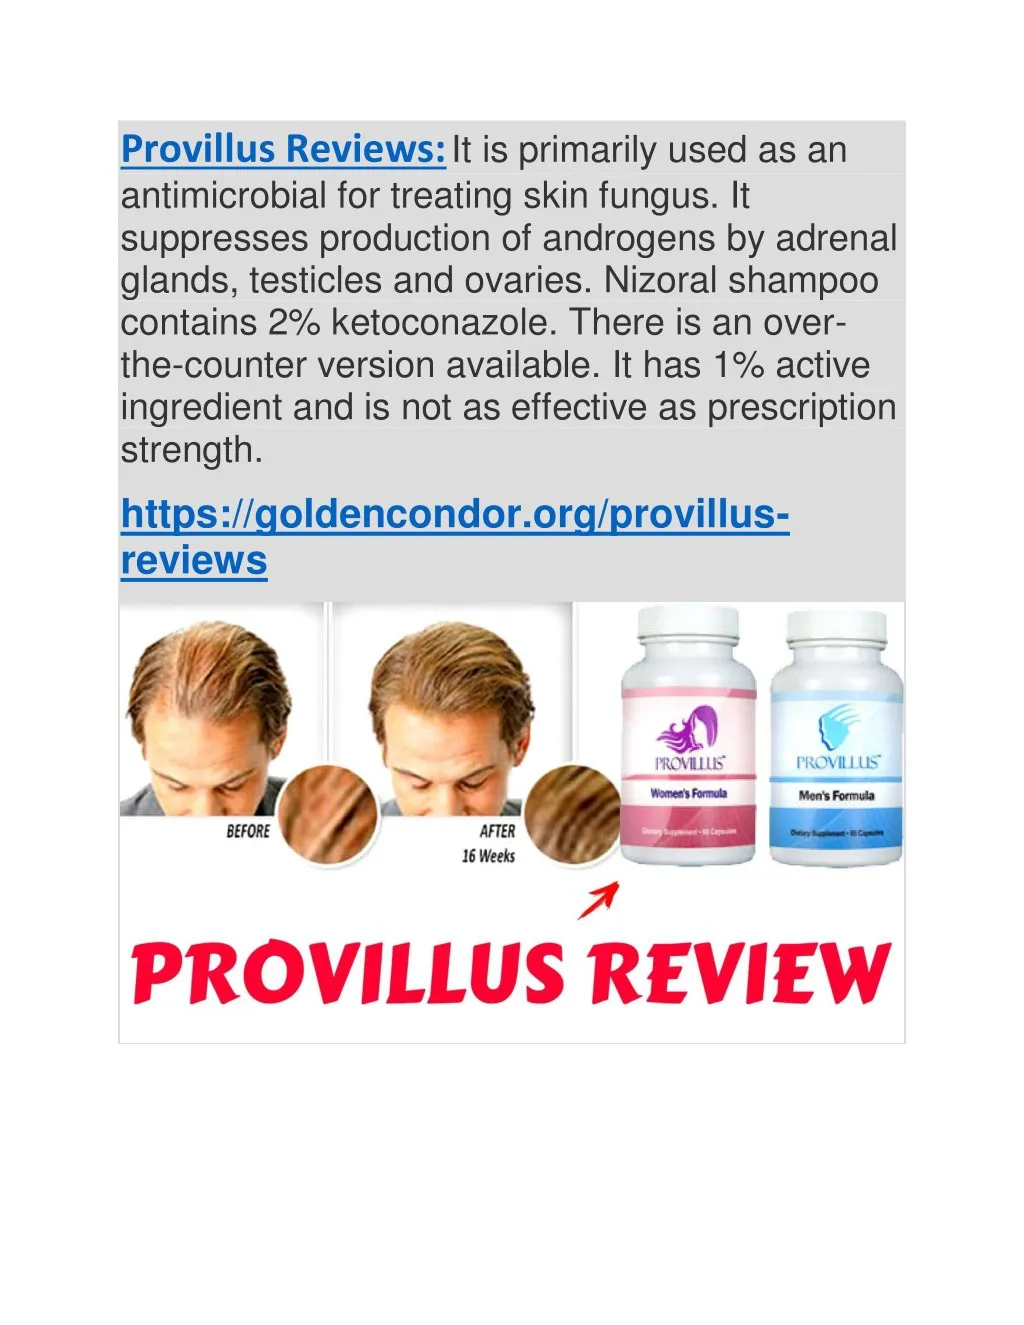 provillus reviews it is primarily used